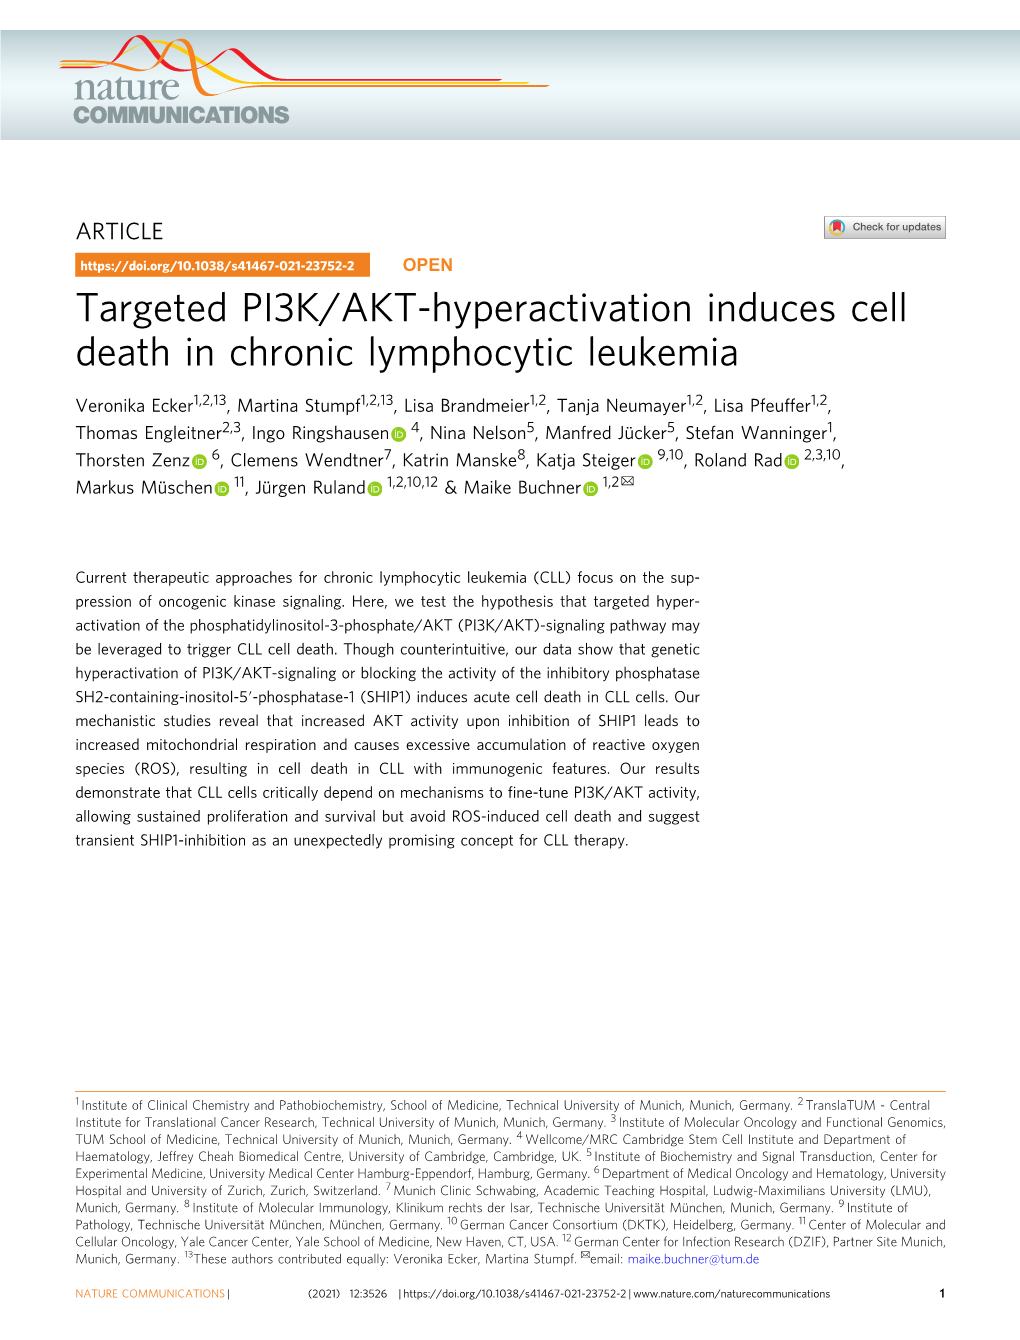 Targeted PI3K/AKT-Hyperactivation Induces Cell Death in Chronic Lymphocytic Leukemia